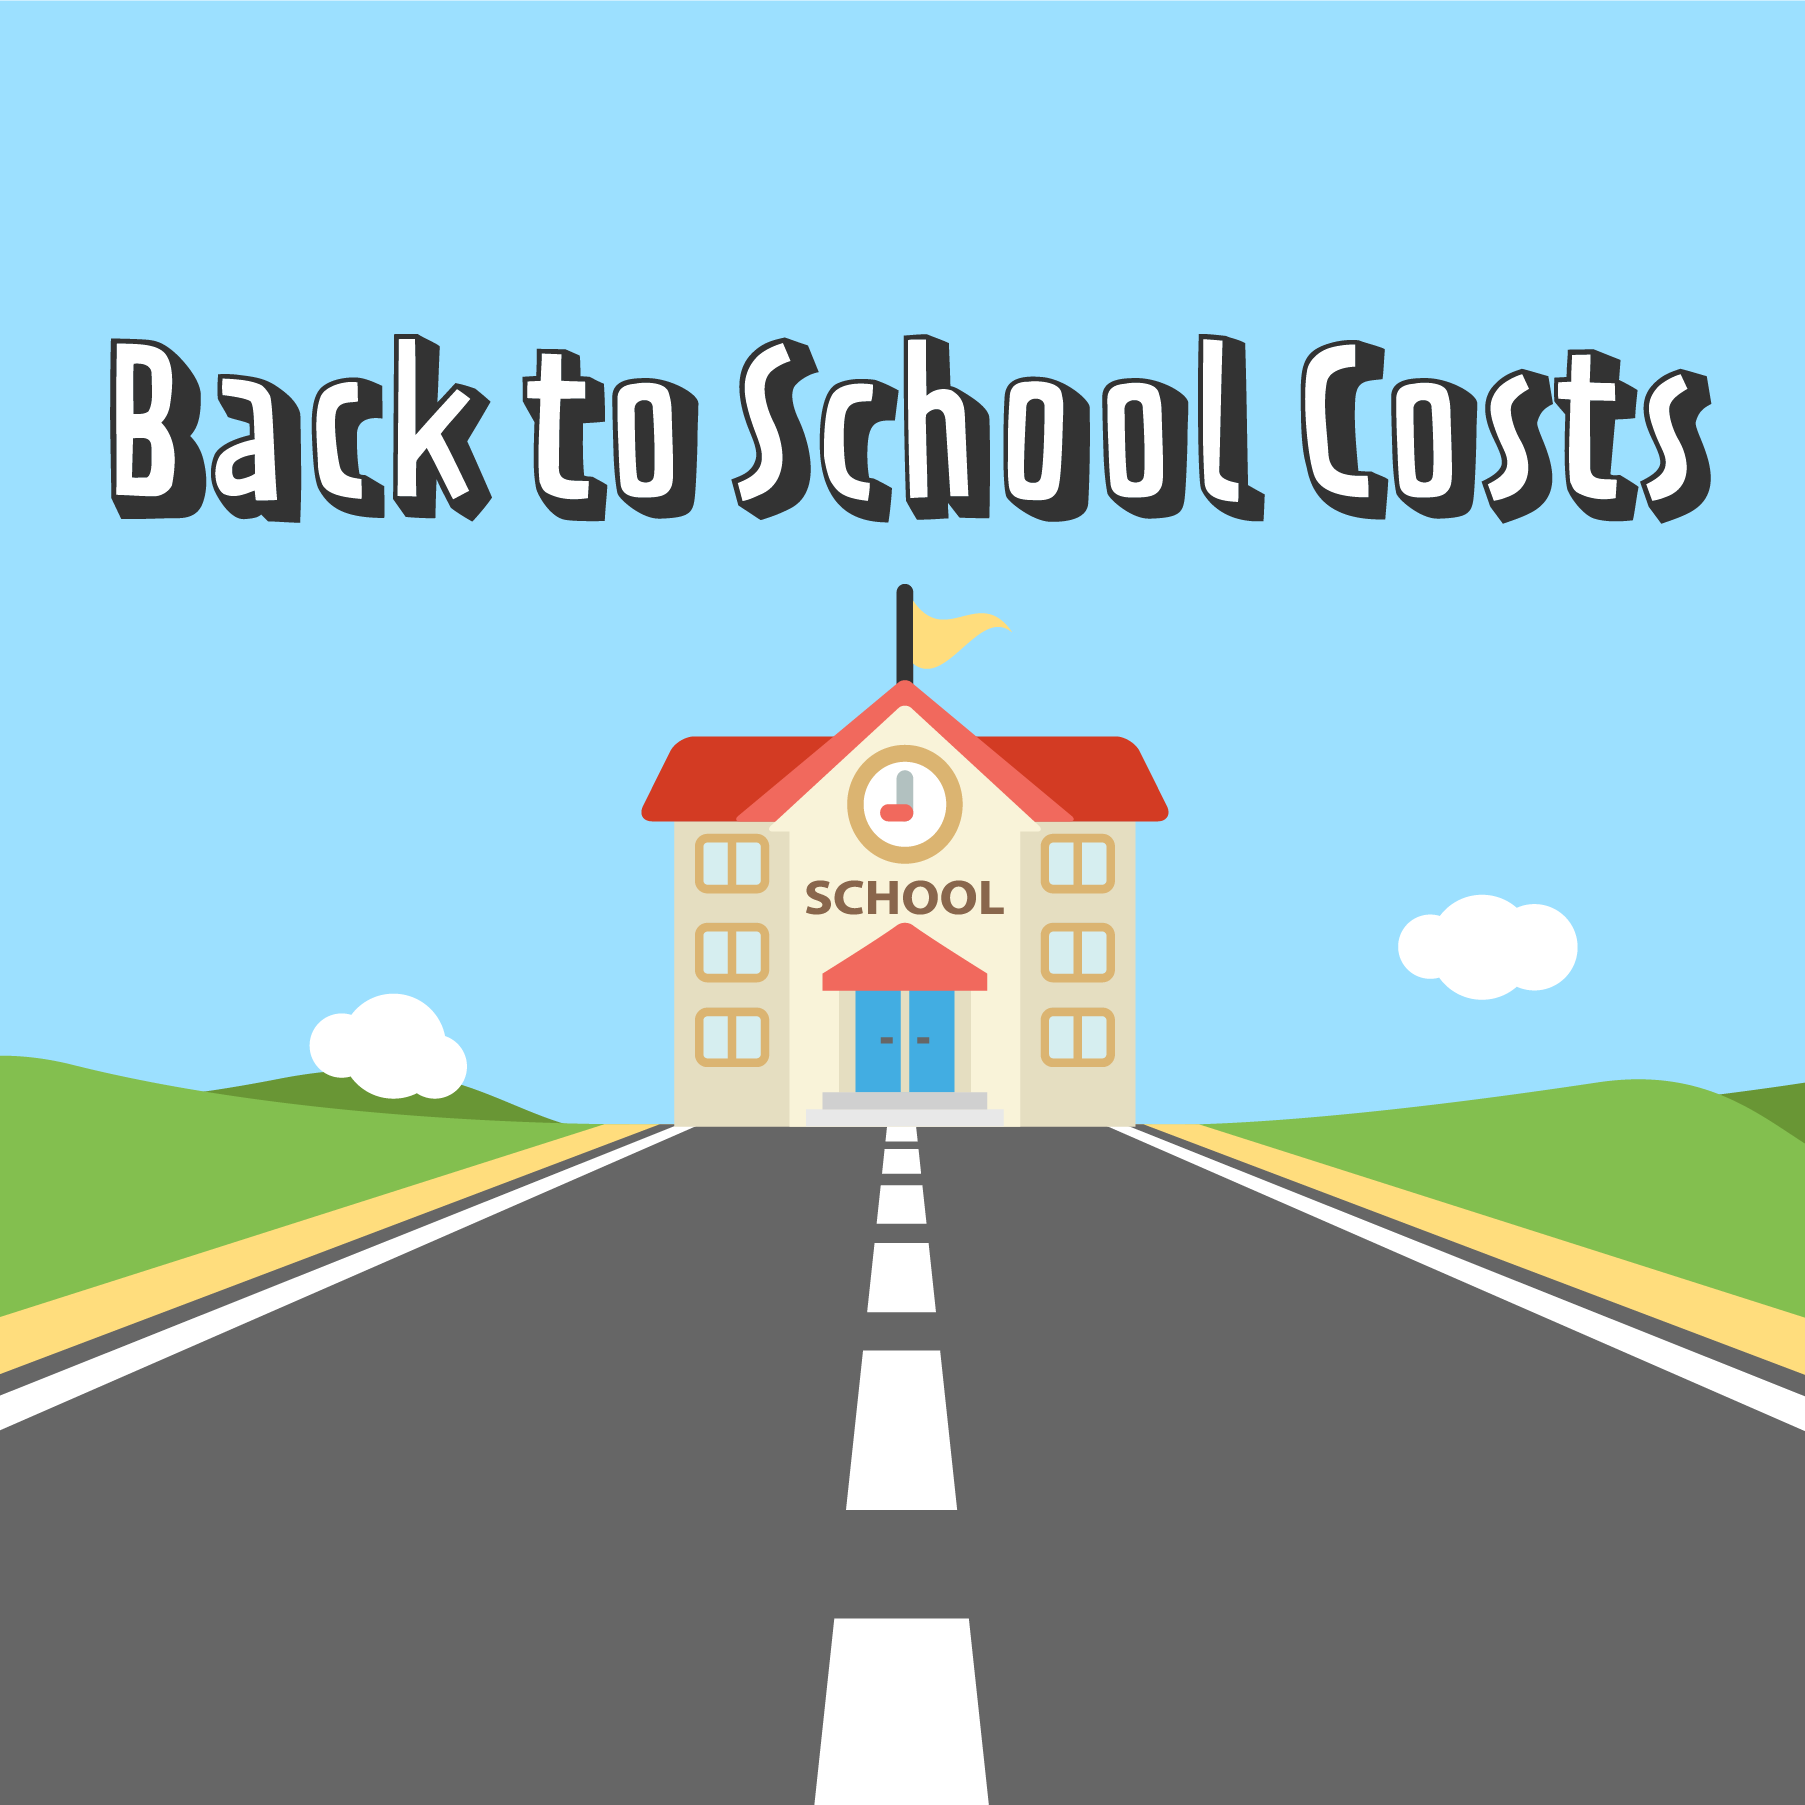 Back to School Costs